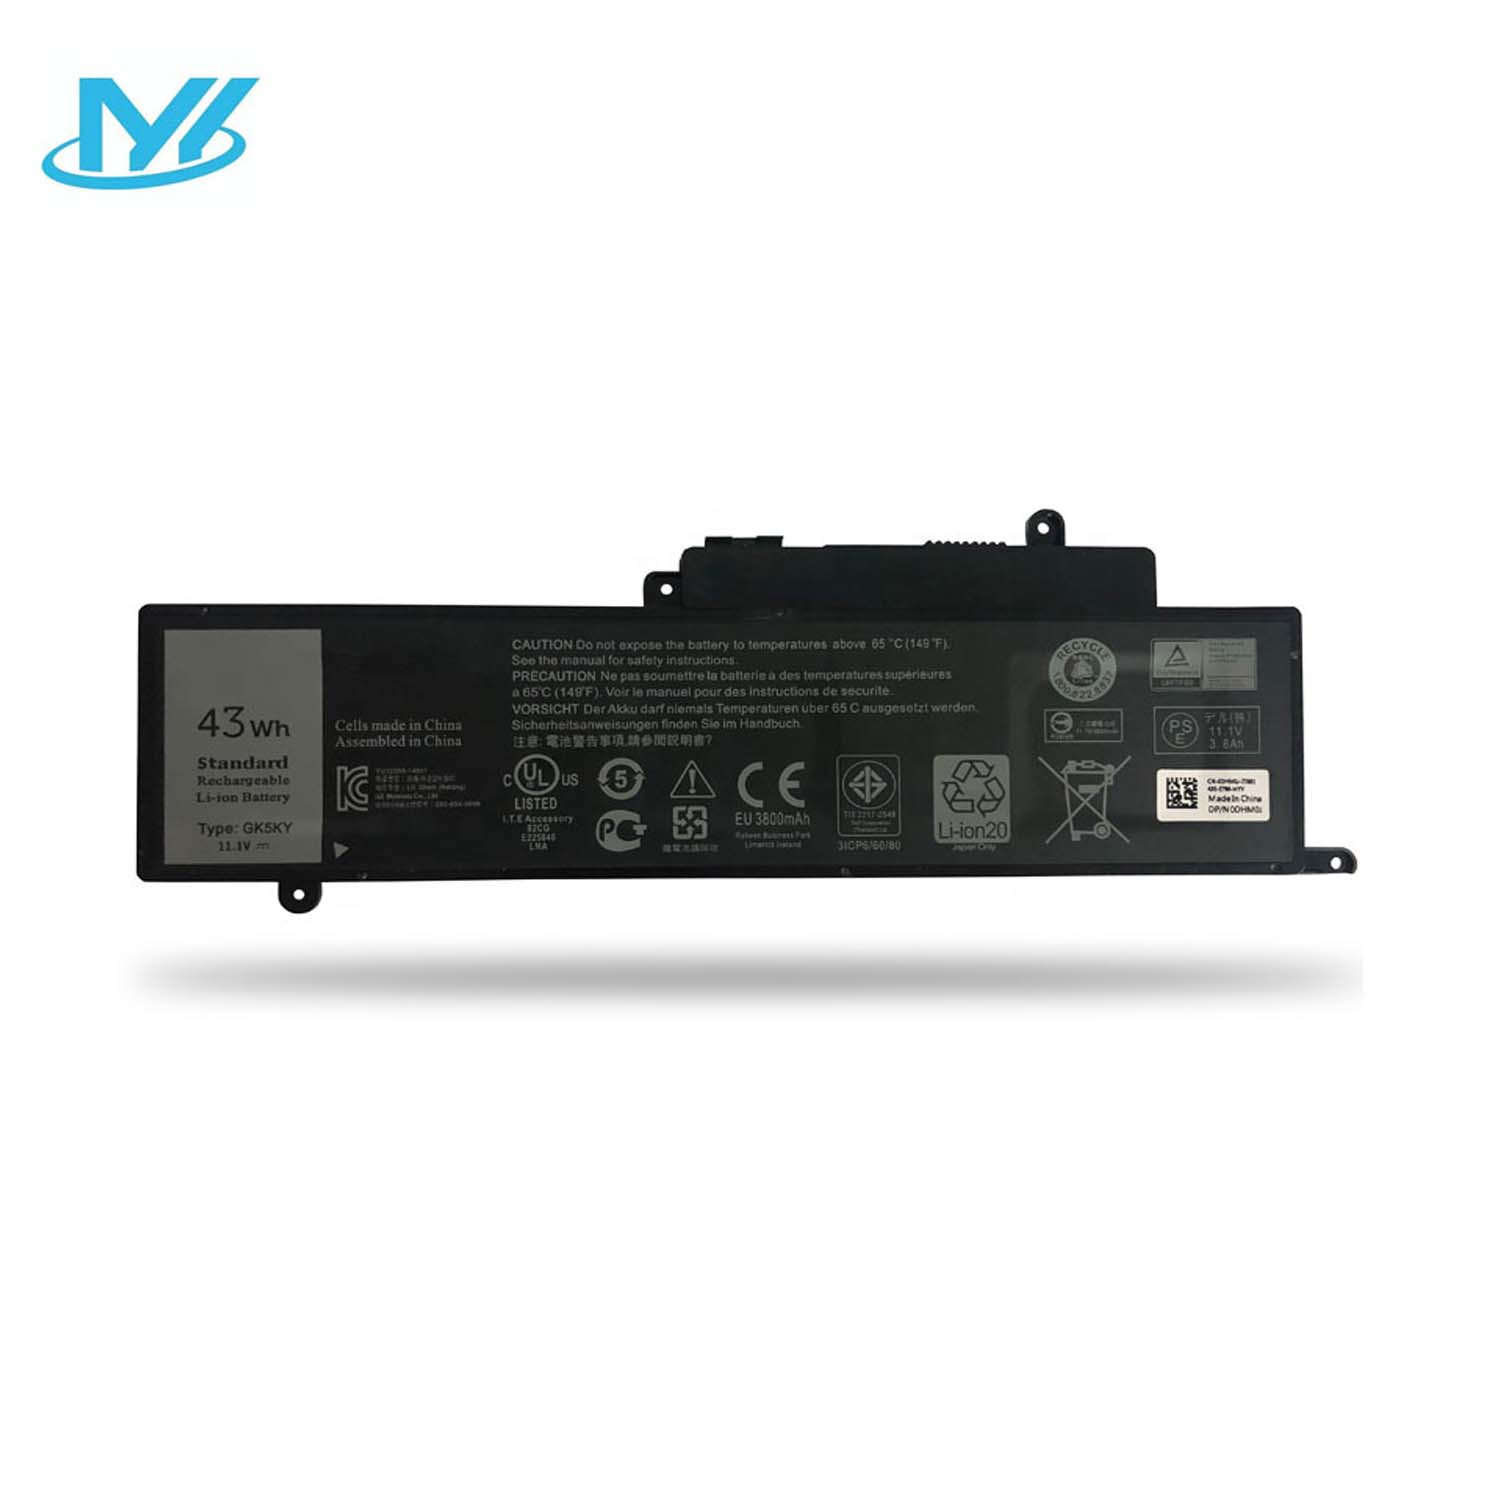 GK5KY 11.4V 43Wh Rechargeable lithium ion laptop Battery 04K8YH 92NCT 092NCT 4K8YH P20T for Dell Inspiron 13 7347 13-7352 3147 3000 11-3152 Series laptop